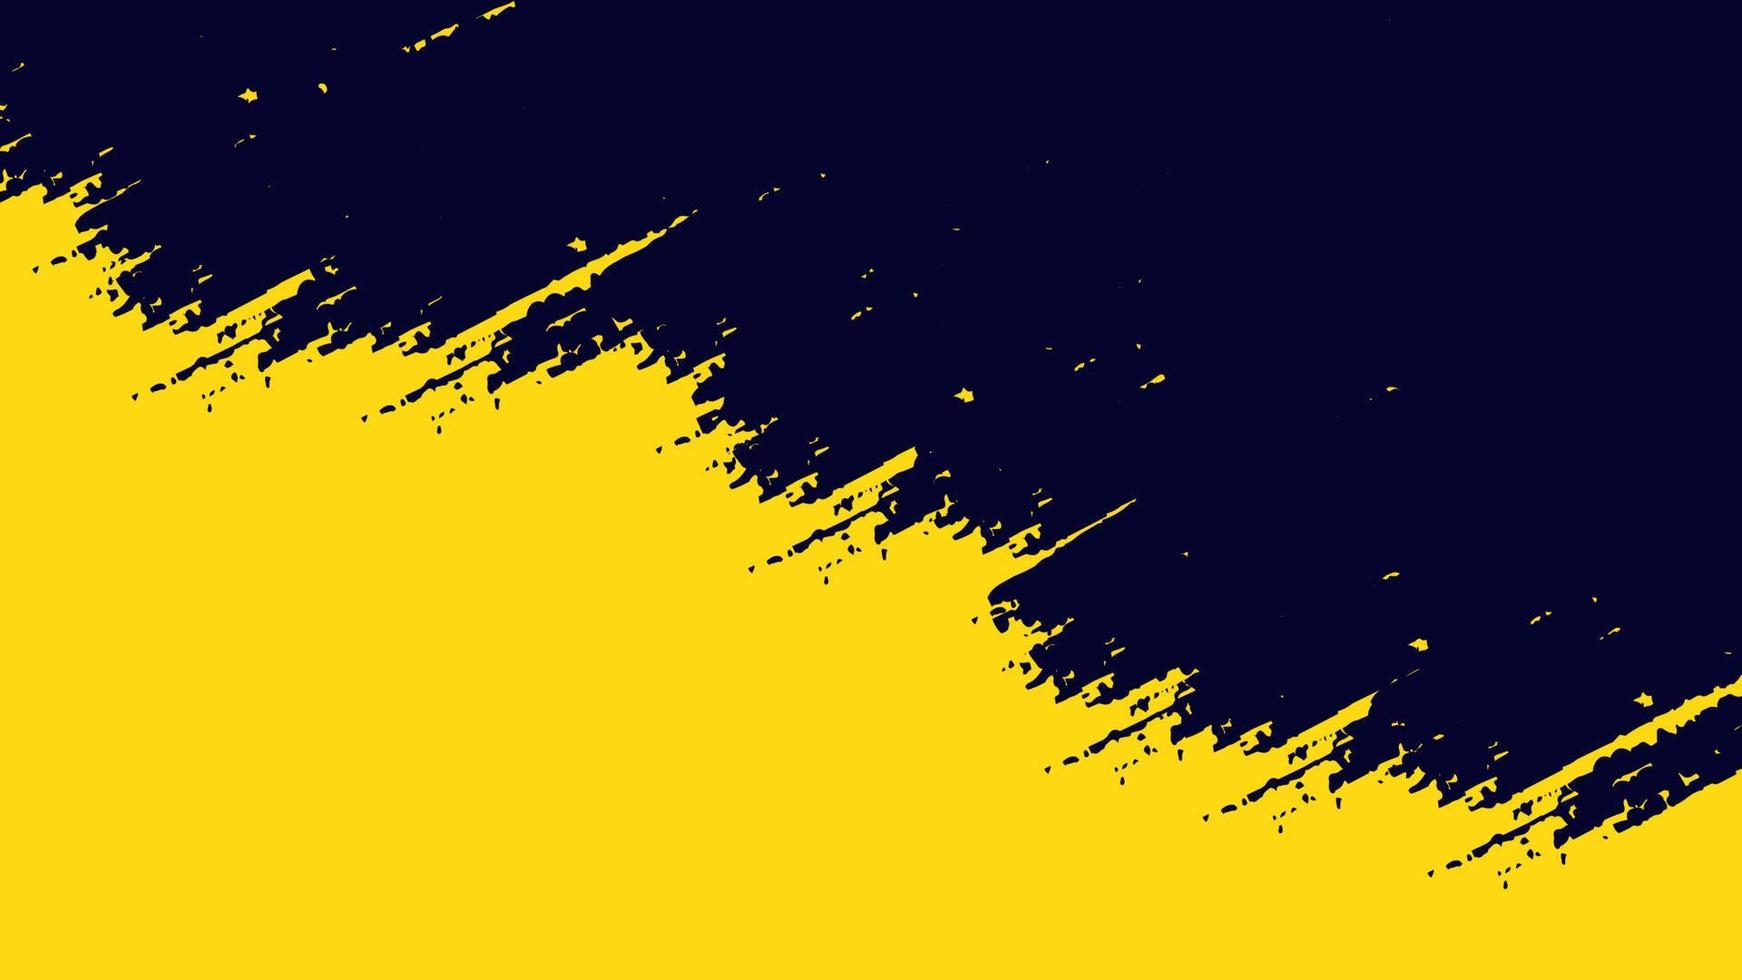 black and yellow grunge modern thumbnail background vector